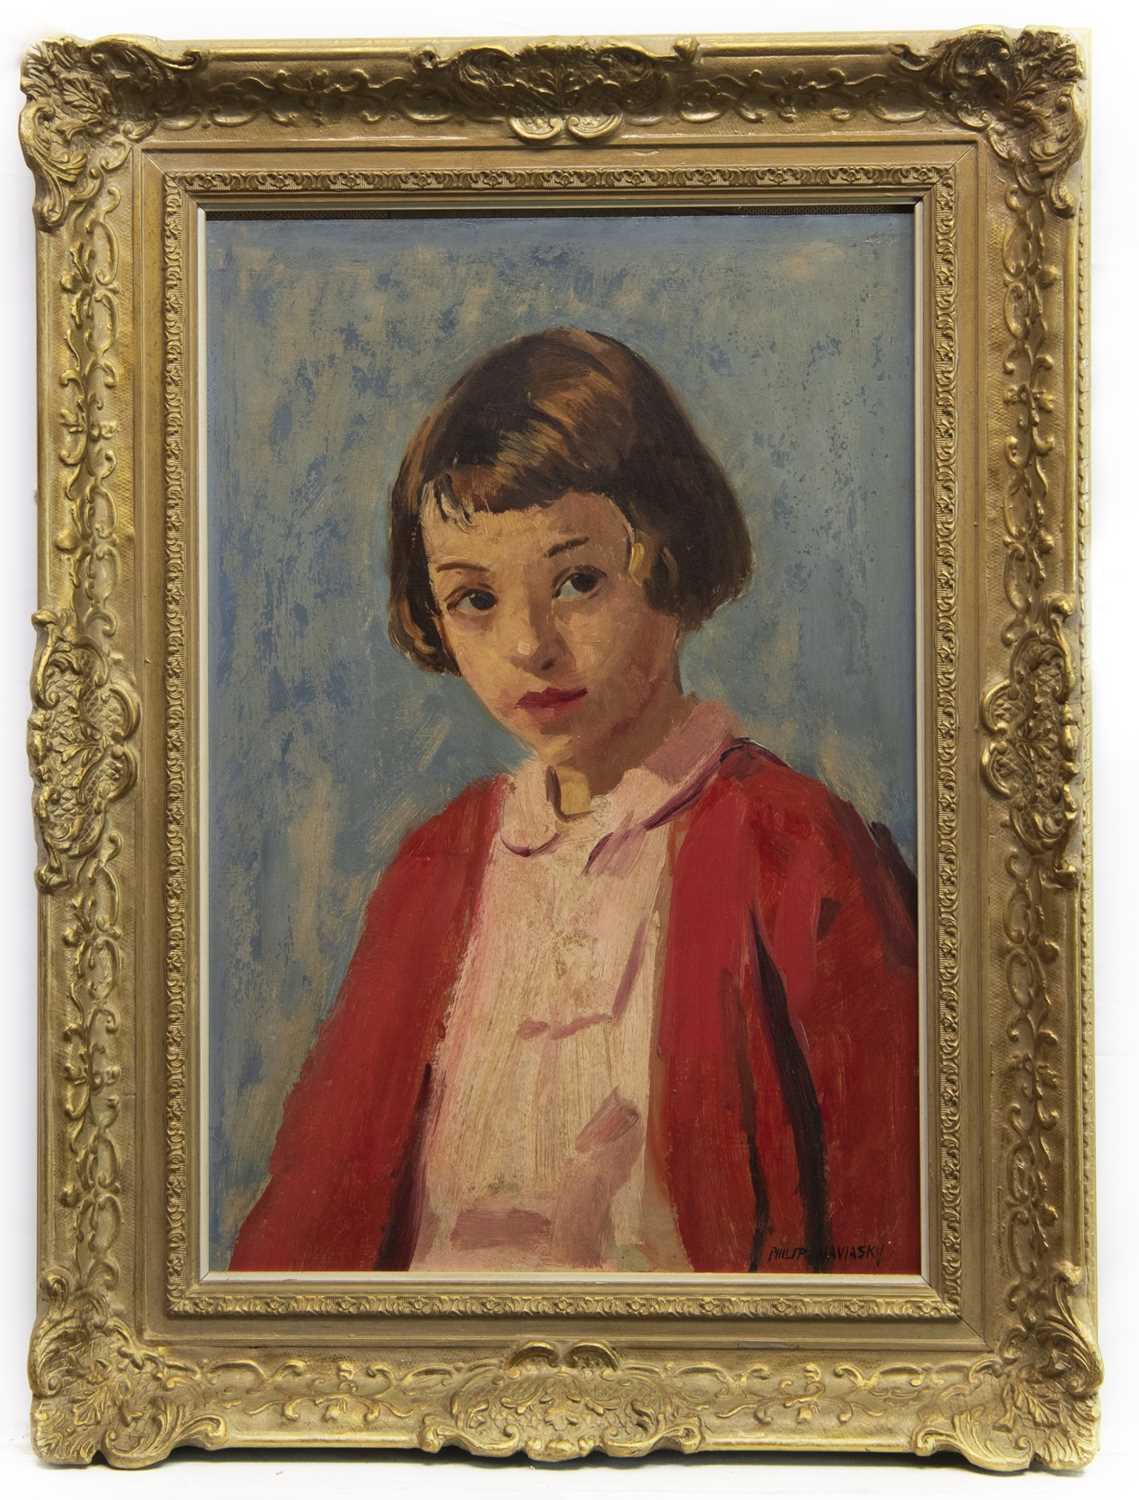 Lot 25 - GIRL IN RED, AN OIL BY PHILIP NAVIASKY